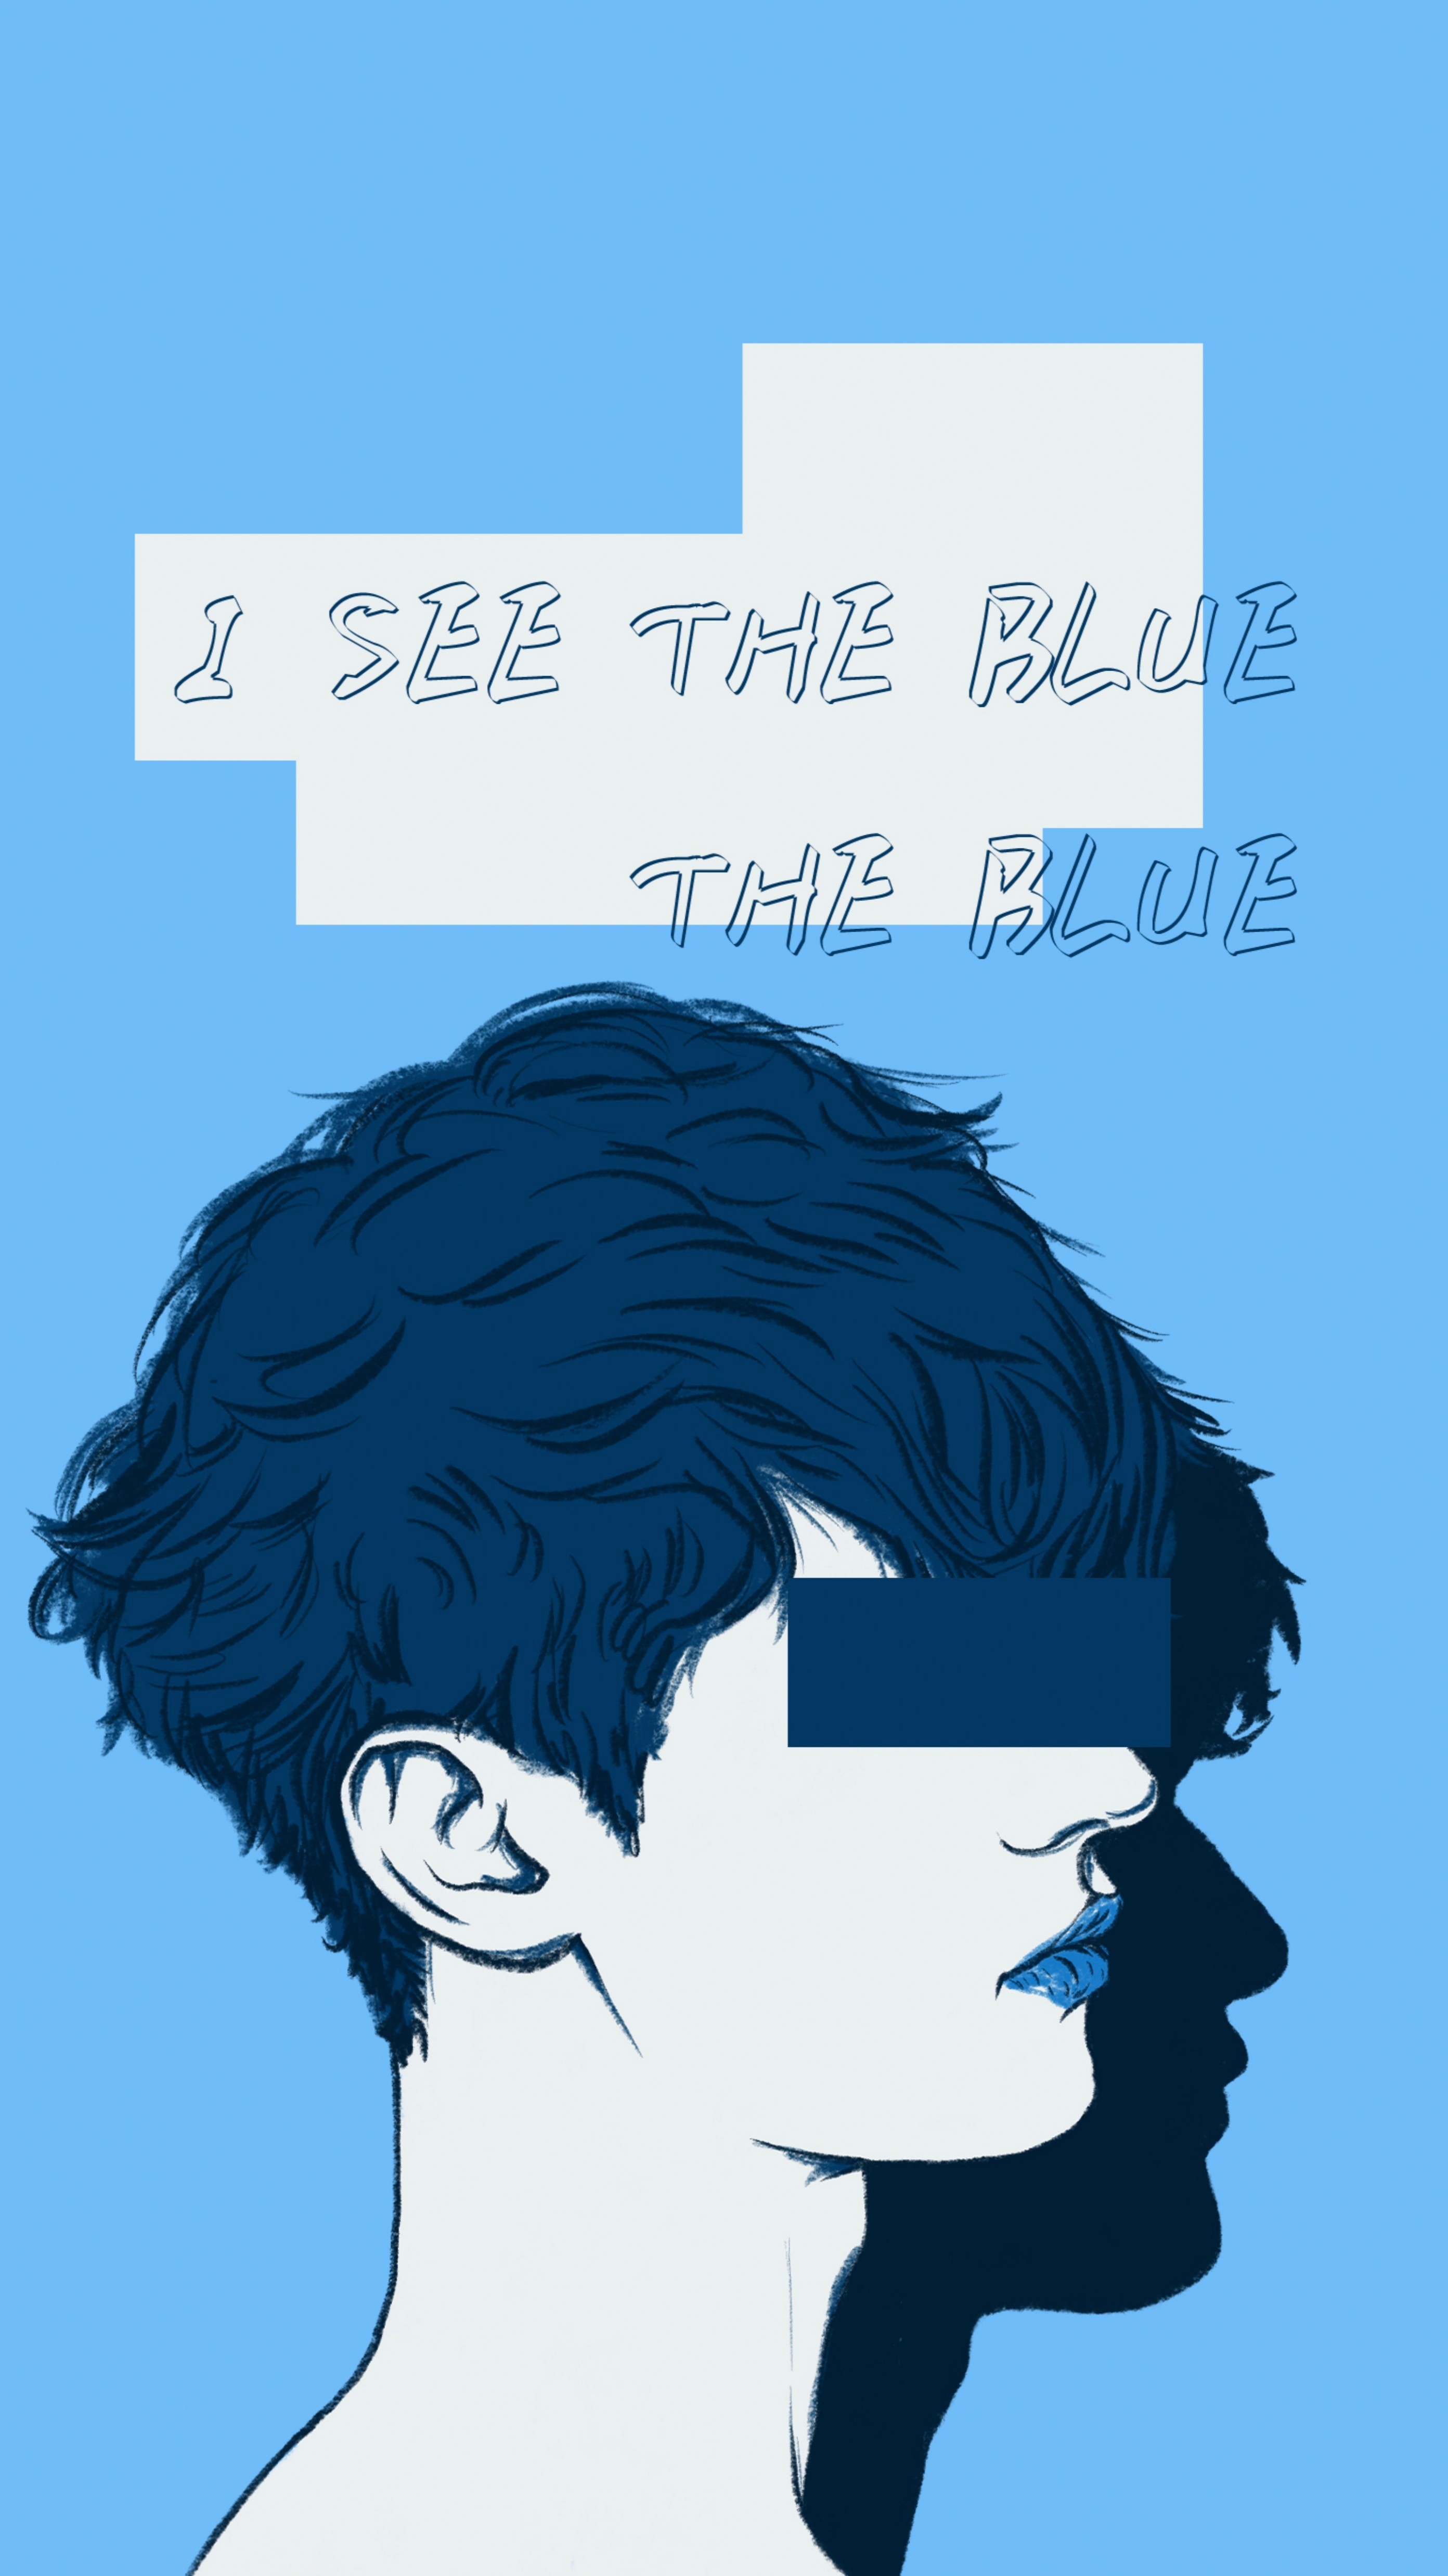 I SEE THE BLUE